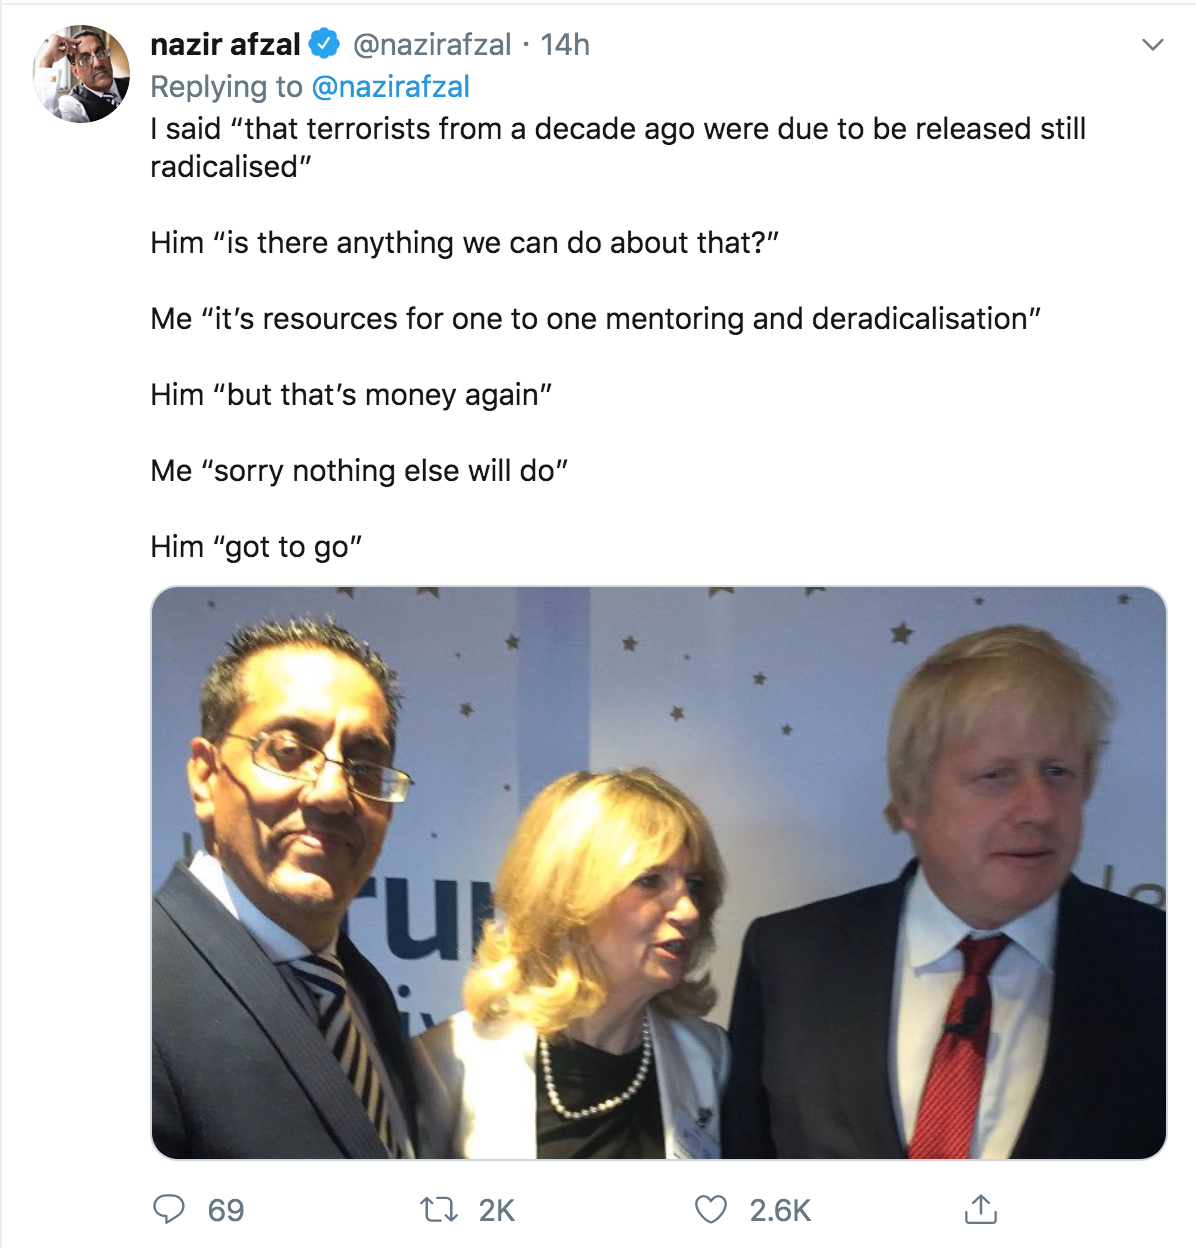 A tweet by Nazir Afzal, the former chief prosecutor for North West England.